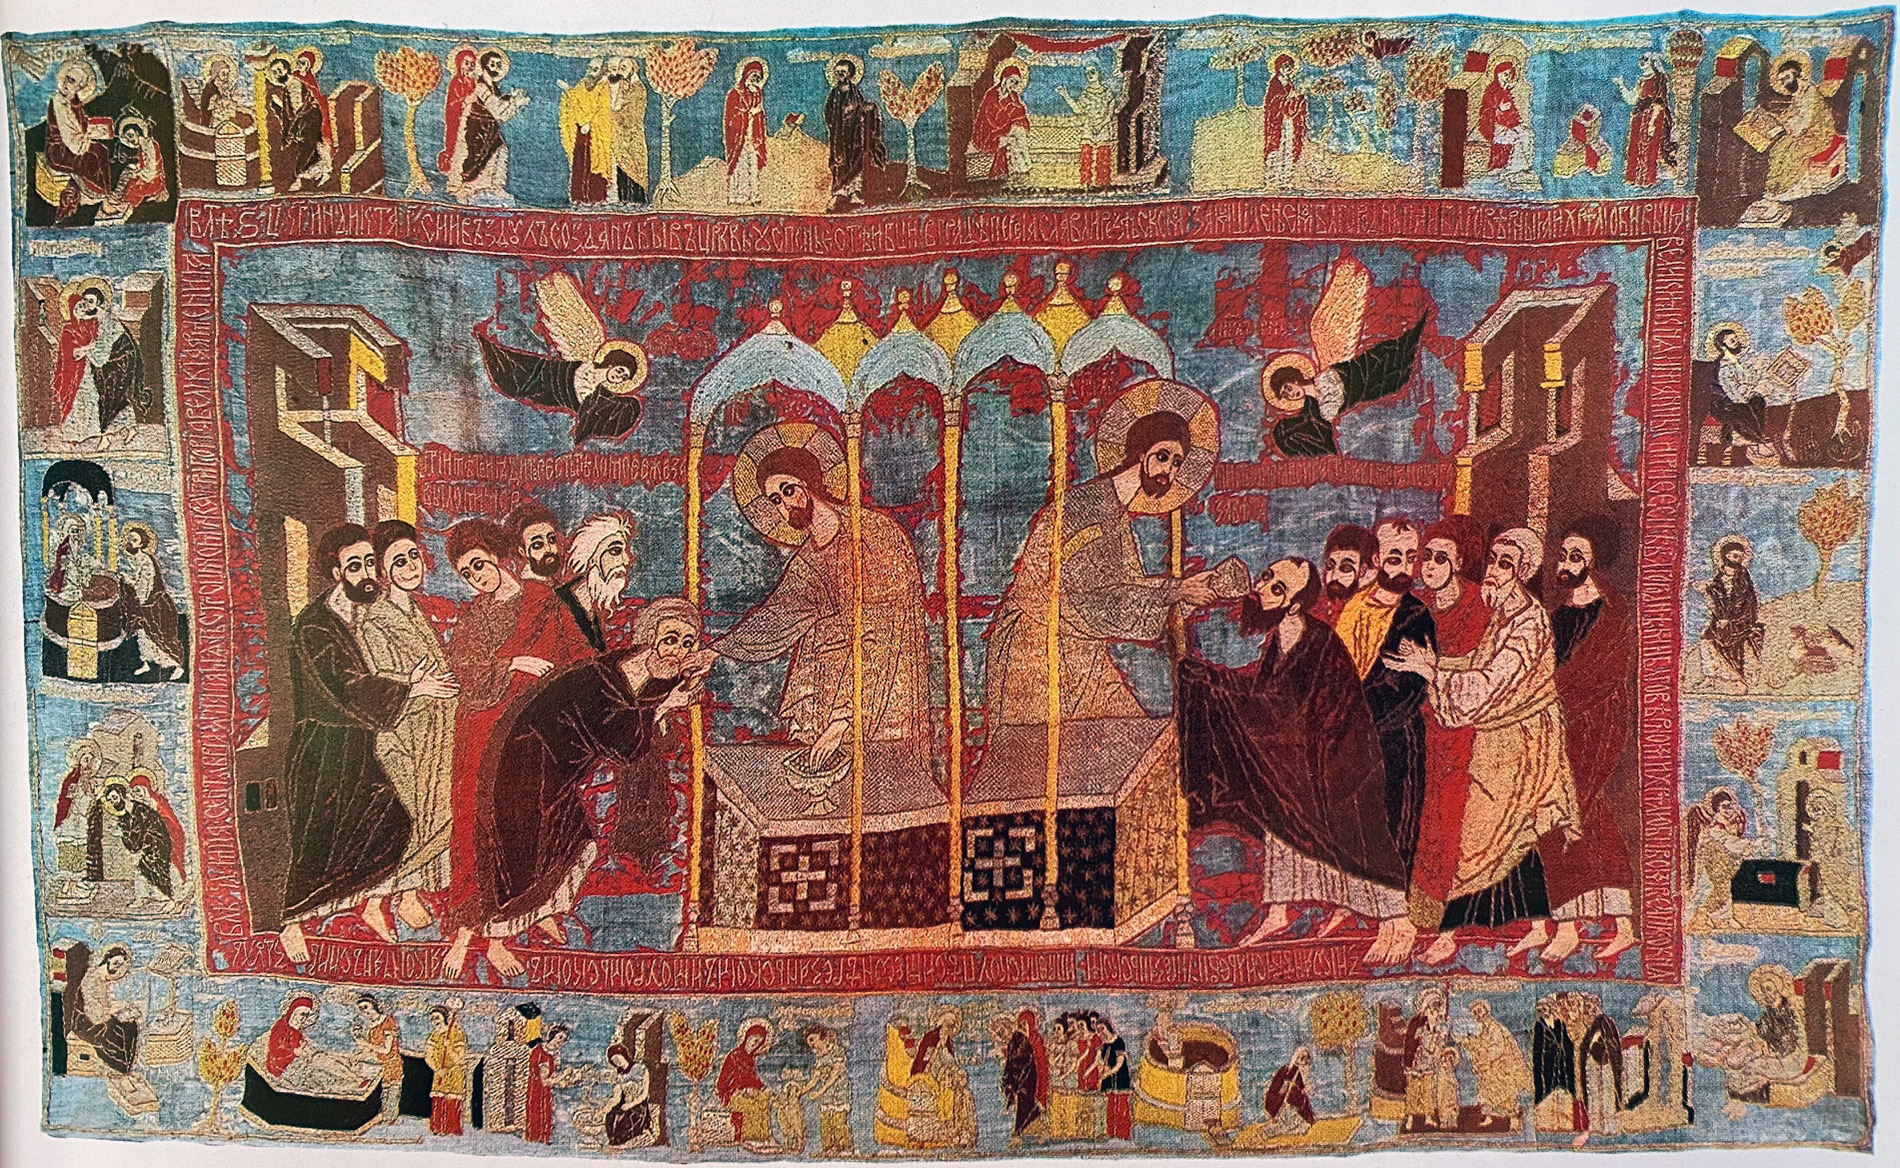 A veil embroidered with a scene of a man shown twice at an altar offering bread and wine to groups of other men surrounded by a border of smaller scenes.